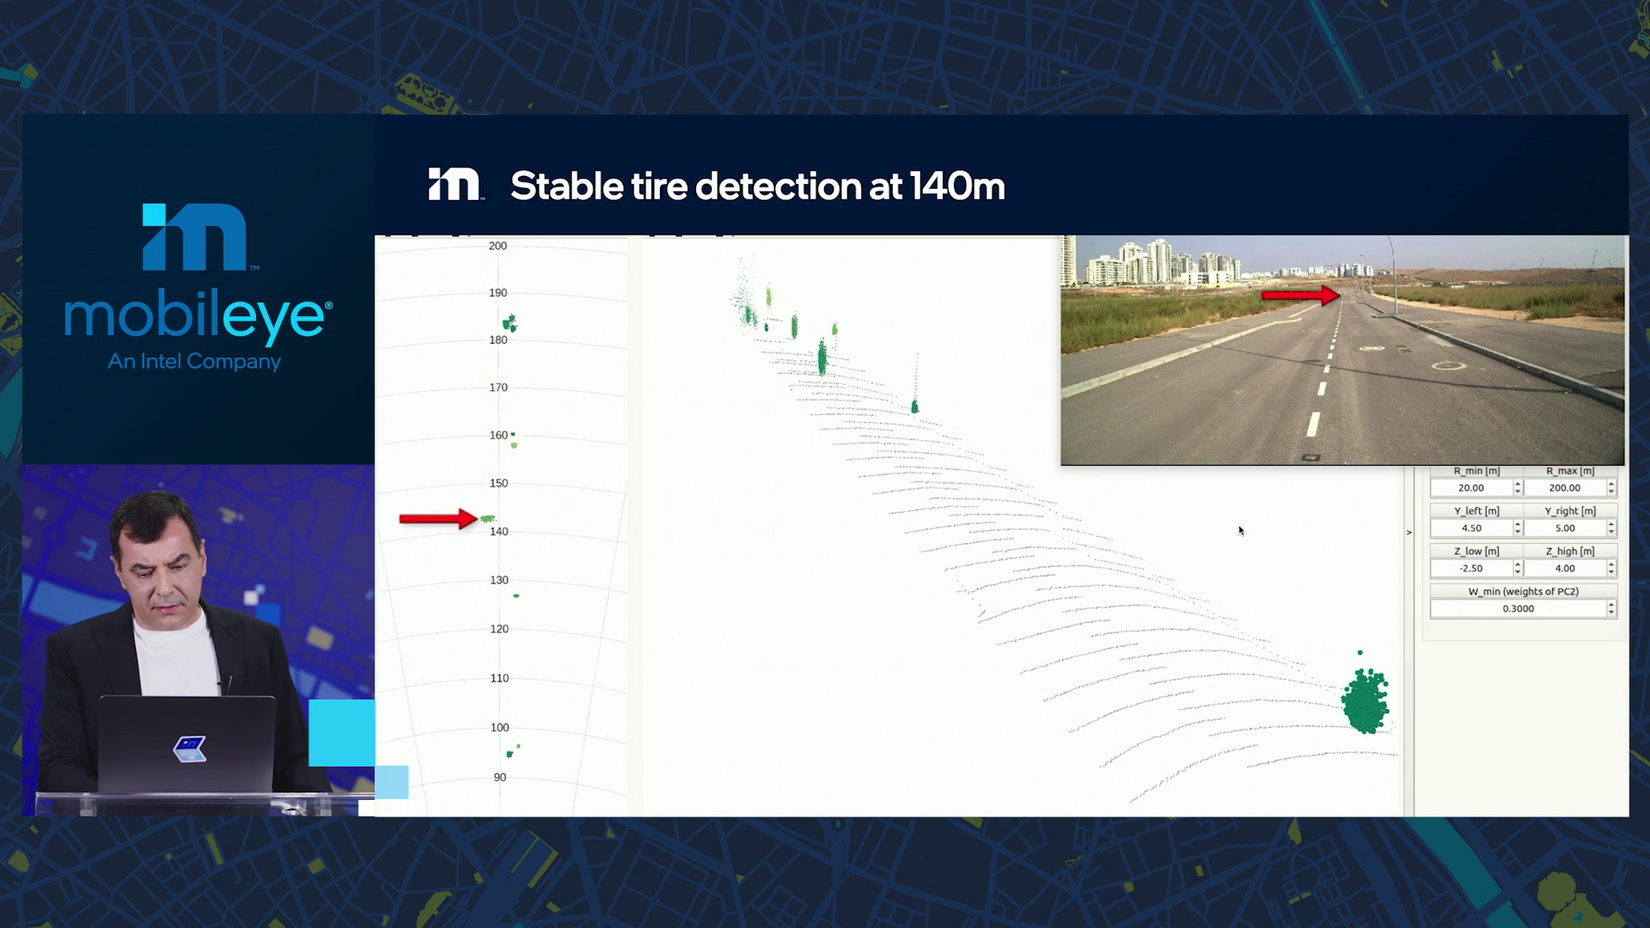 Stable tire detection at 140m